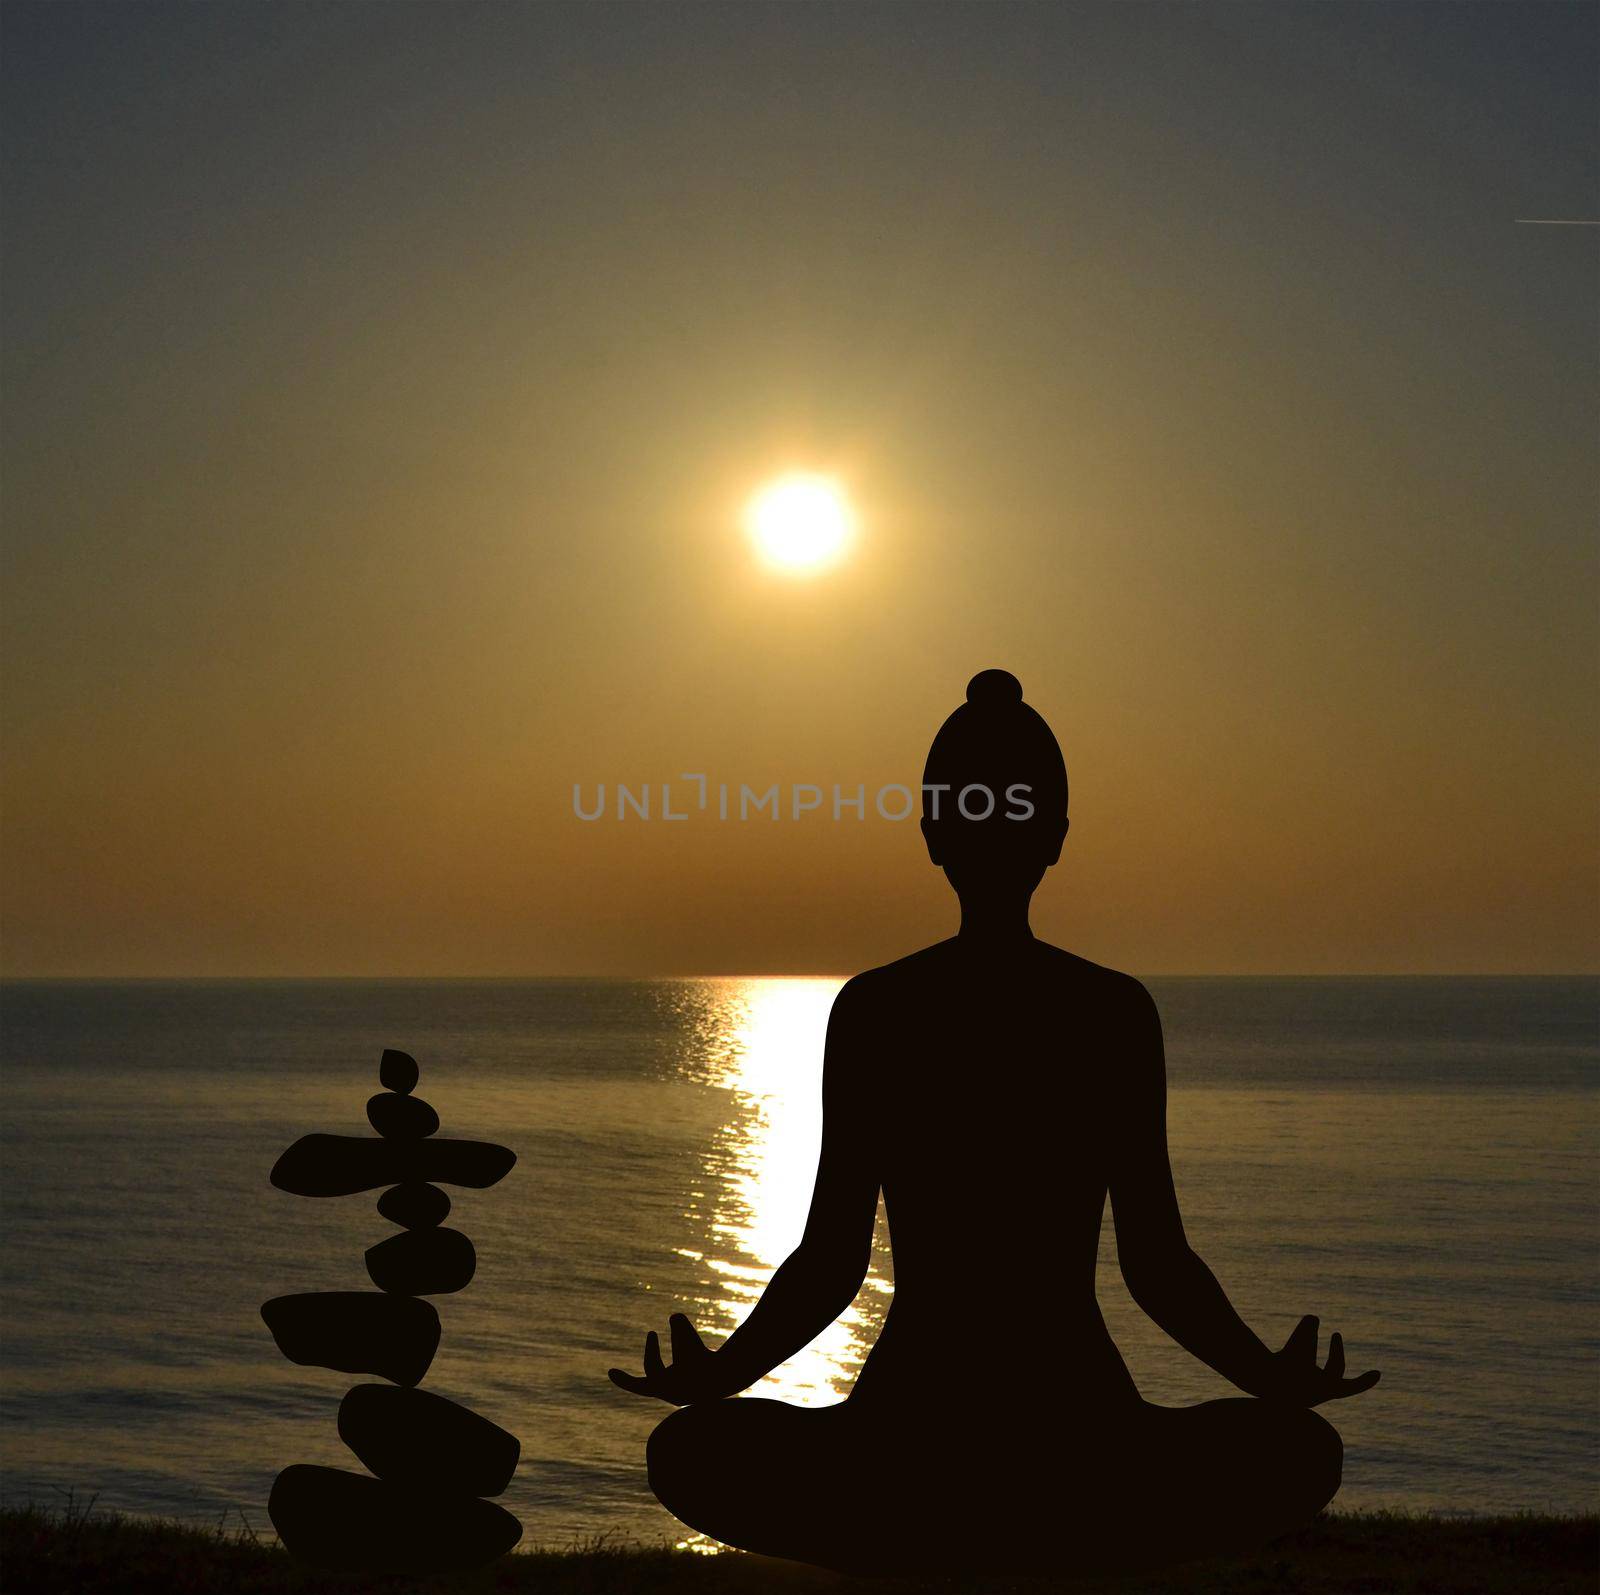 Silhouette of yogi in lotus position and a pile of stone at sea shore at sunrise